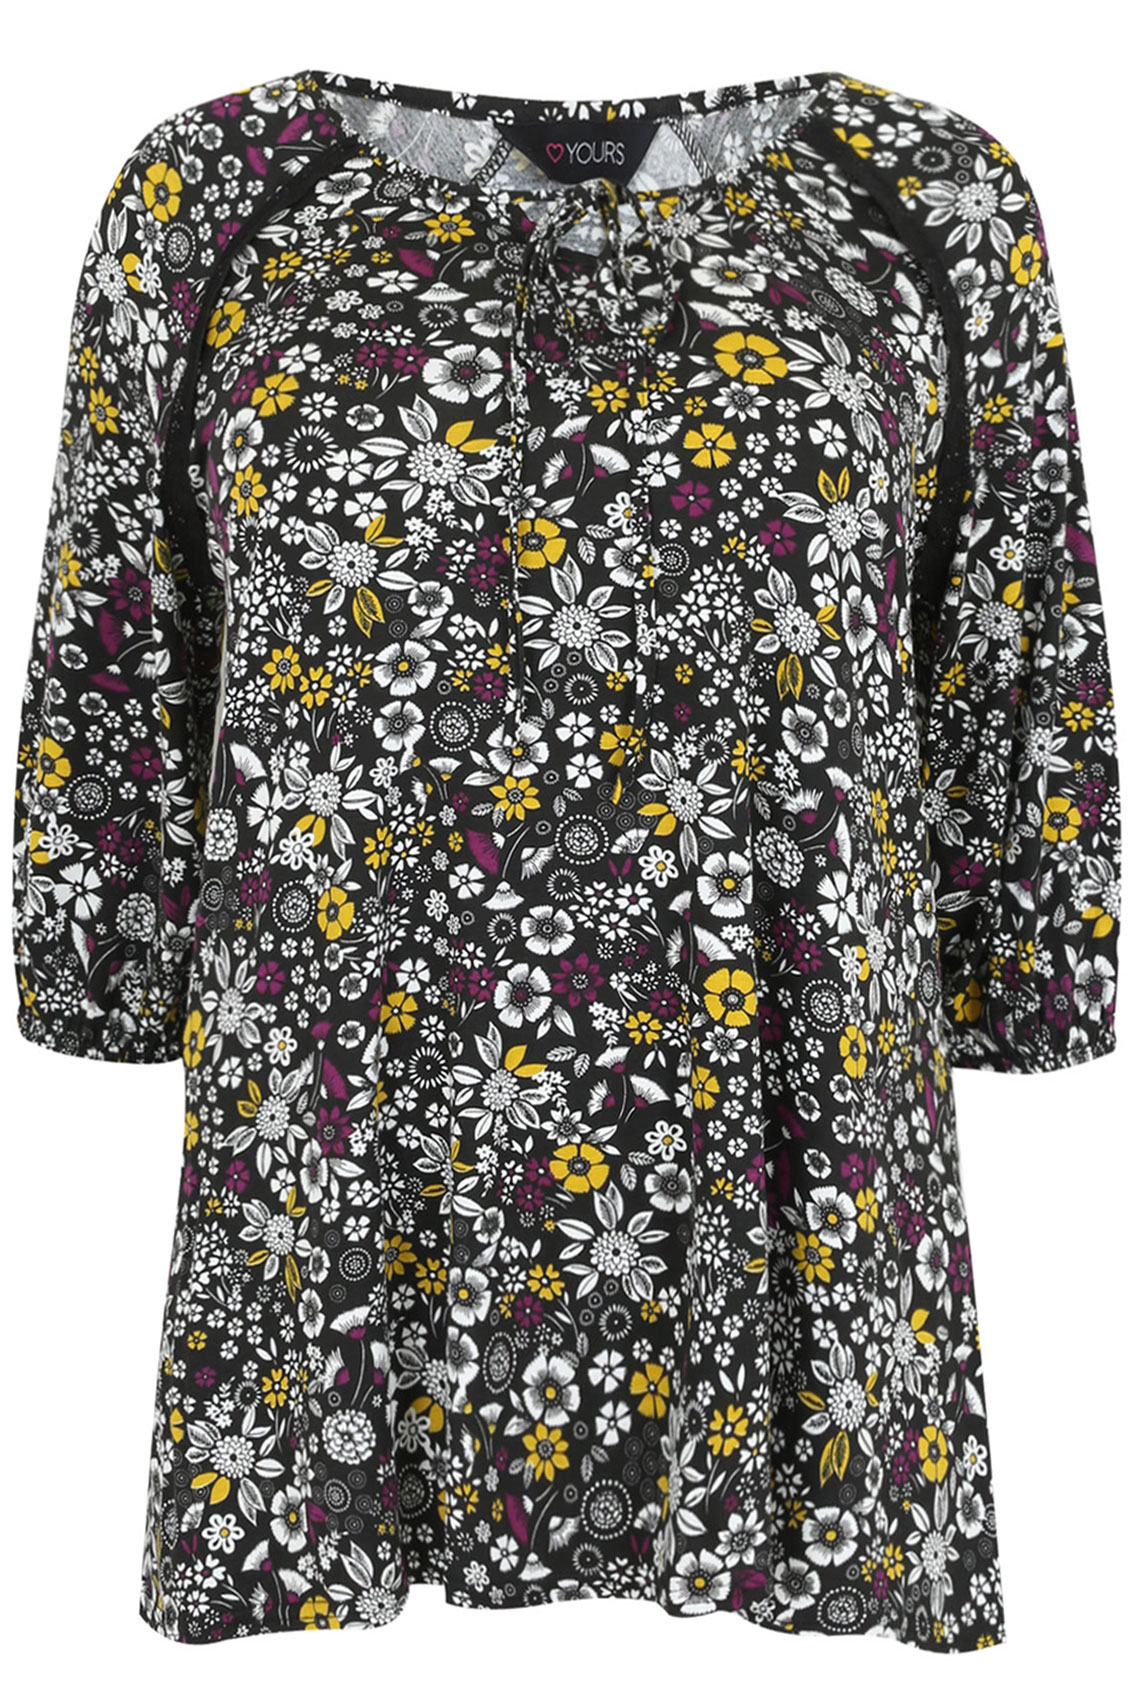 Black White & Yellow Ditsy Floral Print Top With Keyhole Tie Neckline ...